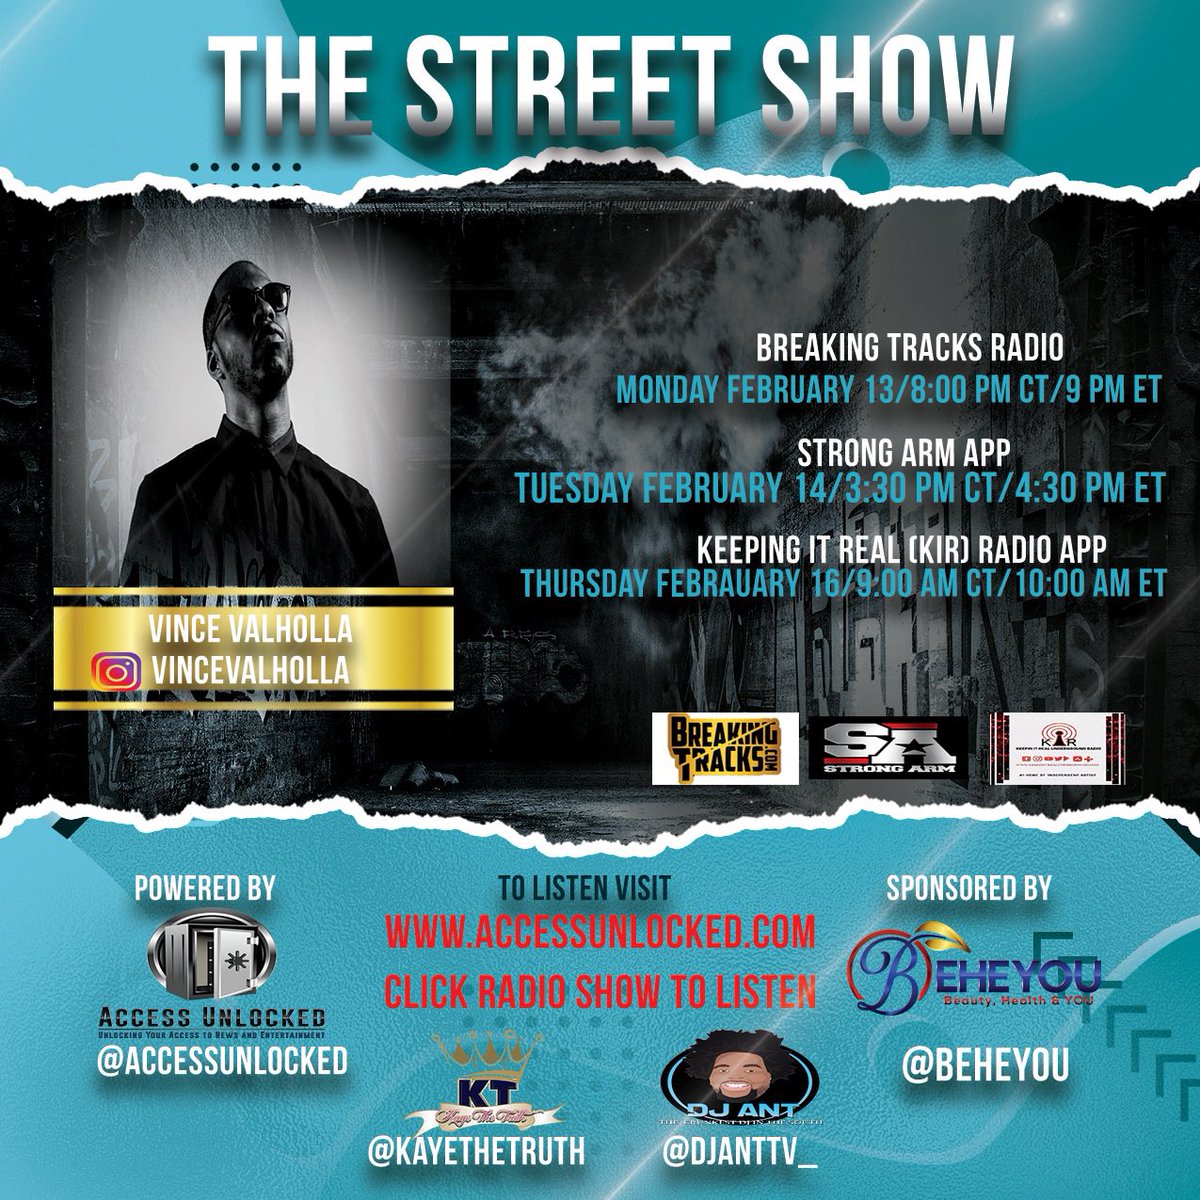 This week on The Street Show our special guest @vincevalholla be sure to tune in  #kayethetruth #djant #wildmanteddyt #fleetdjs #talkshow #podcast #accessunlocked #news #media #indiemusic #network #branding #talkshow #branding #marketing #promo #pop #vincevalholla #breakingtracks